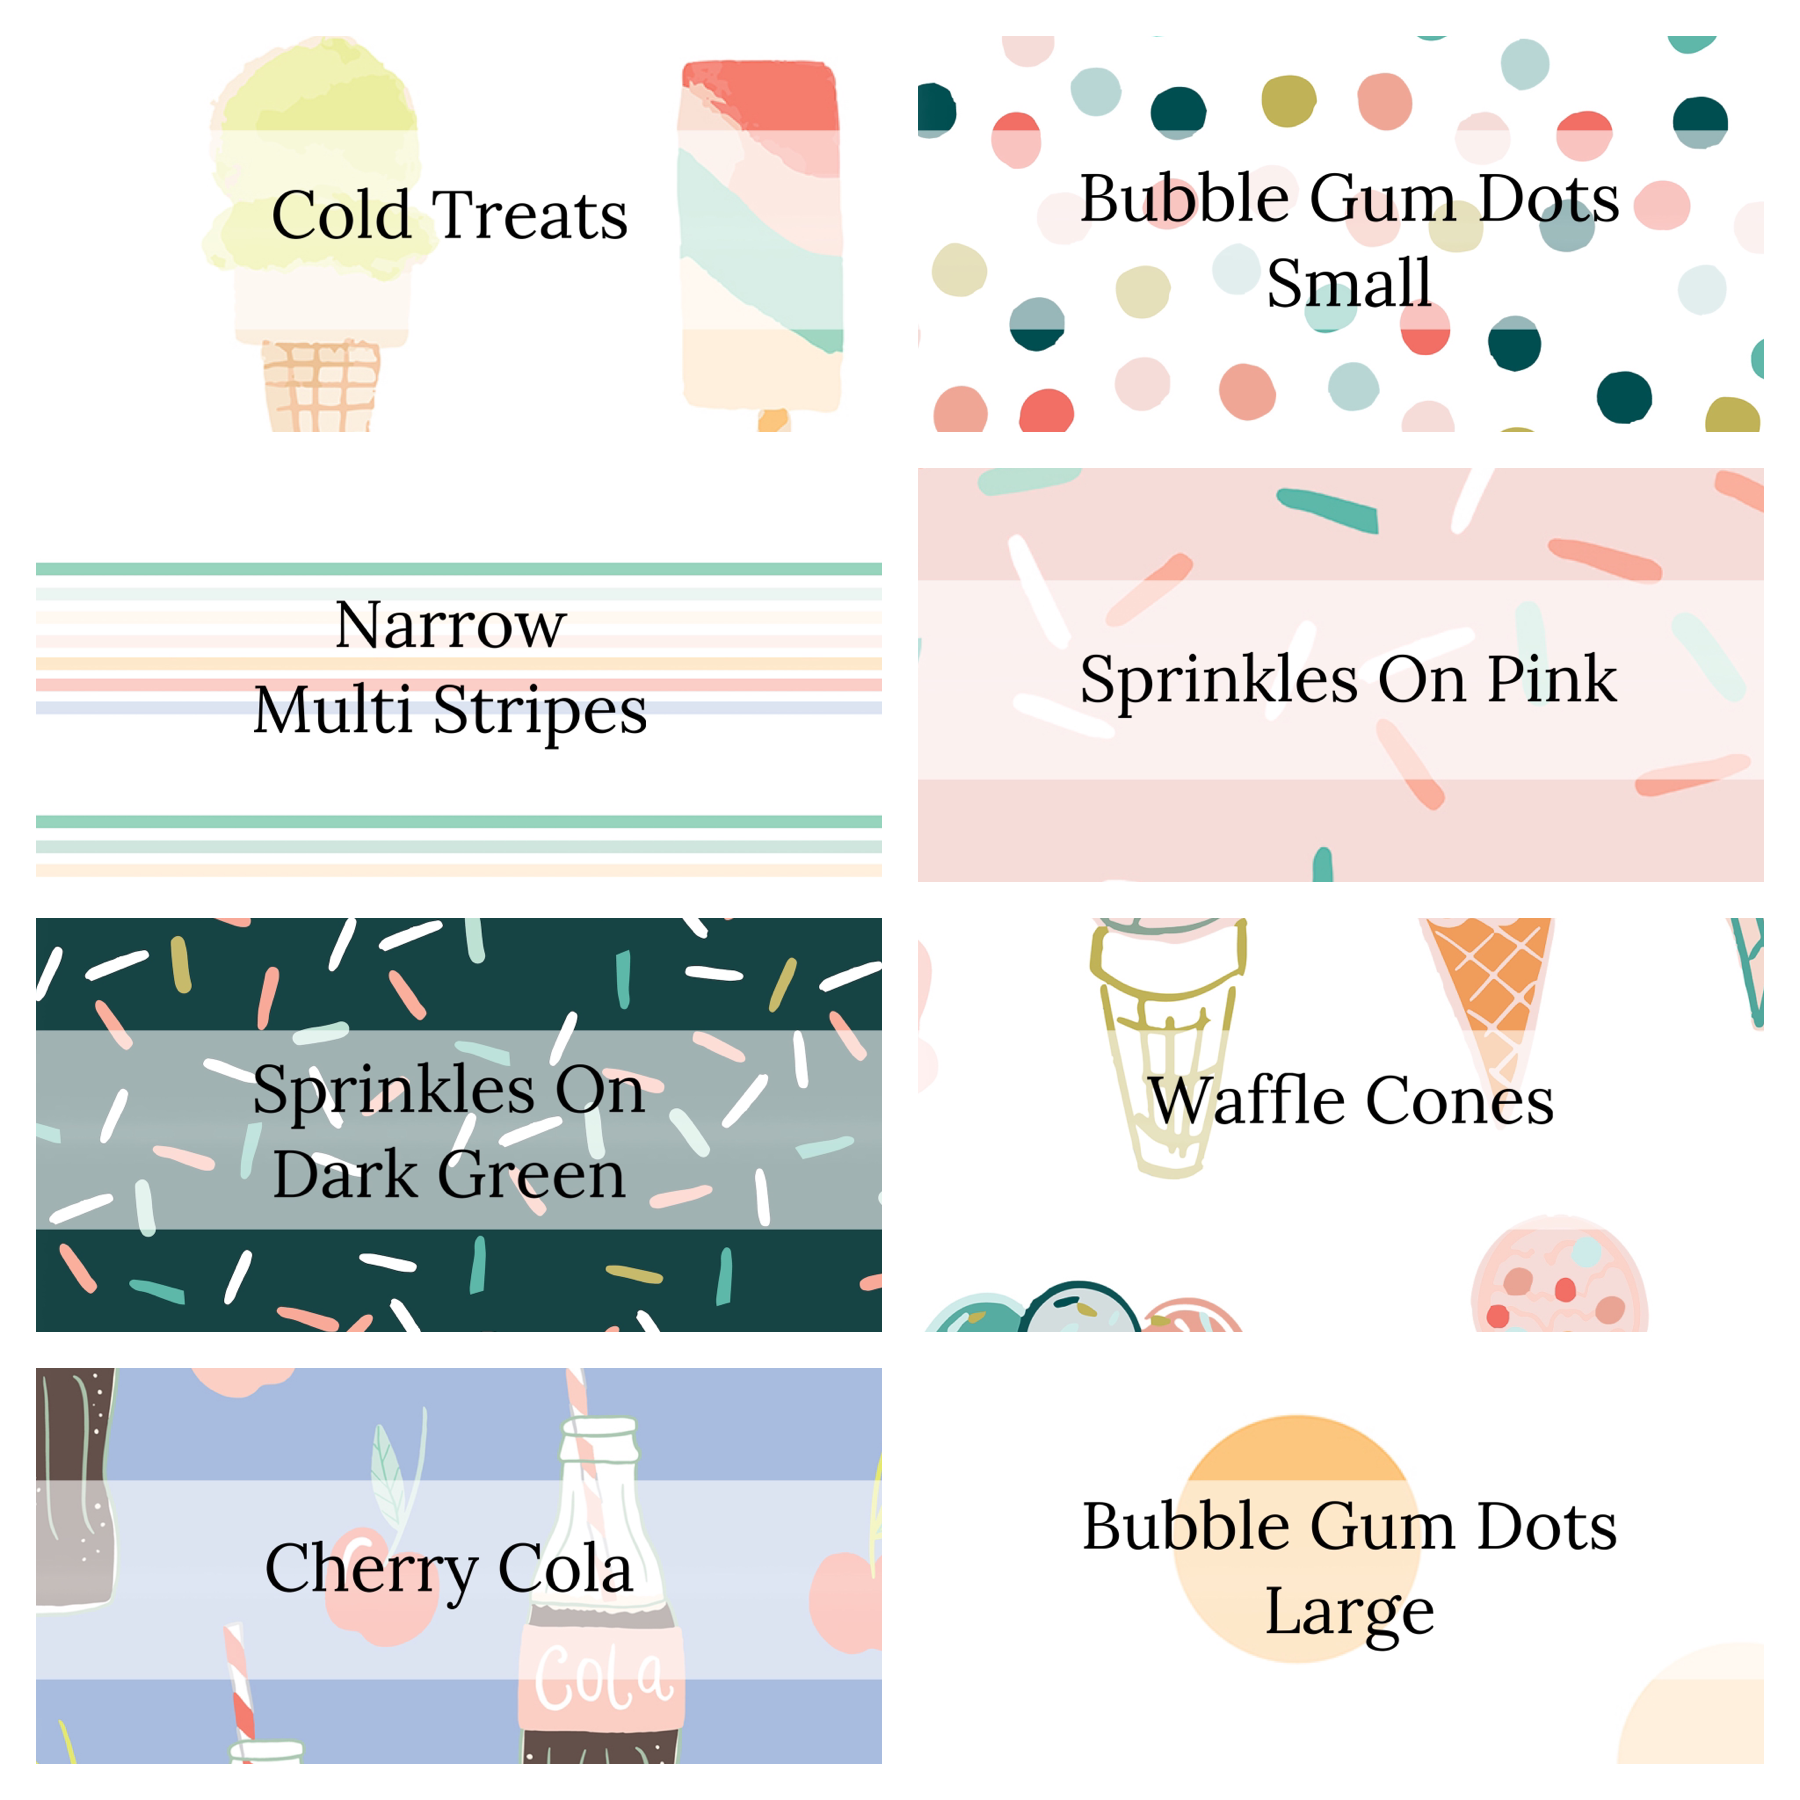 shop-the-official-online-store-of-soda-pop-and-treats-indy-bloom-fabric-supply_9.png